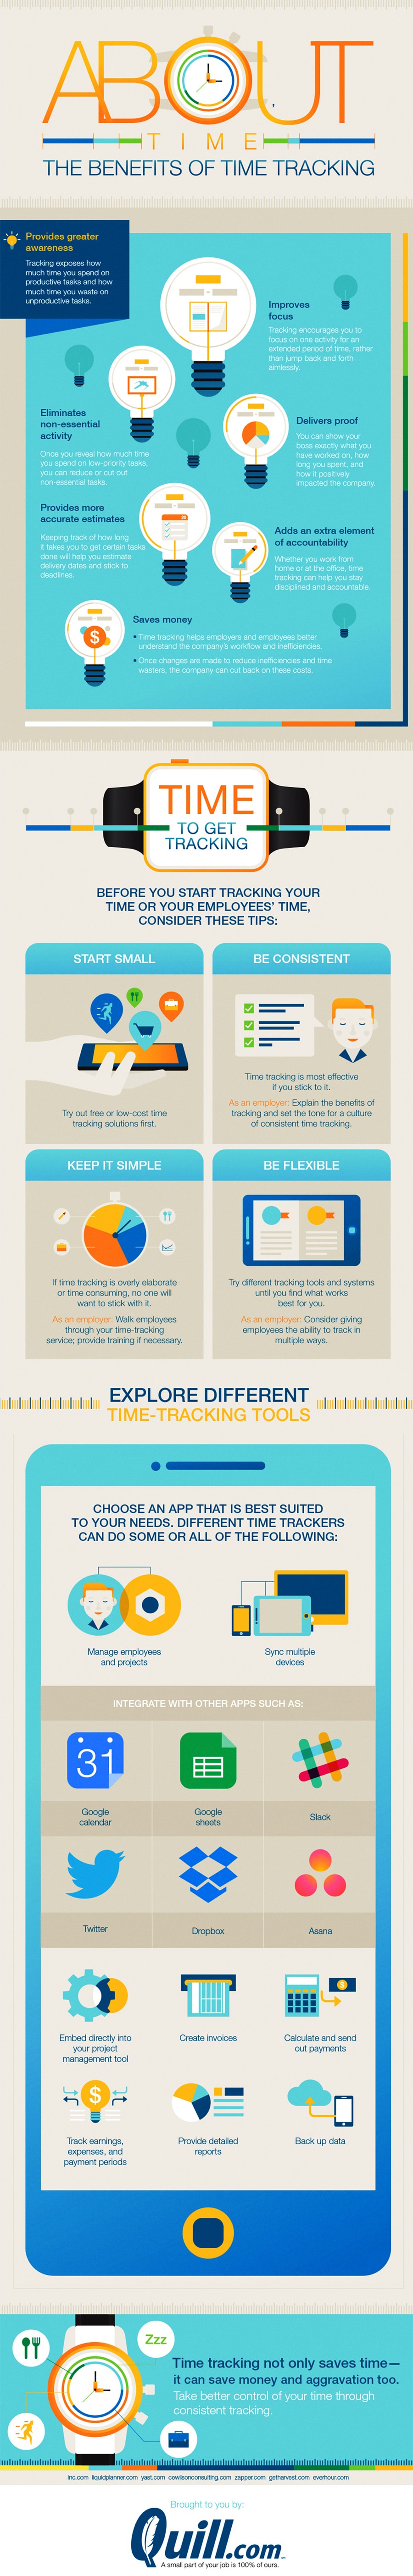 About the benefits of time tracking infographic including applications and statistics